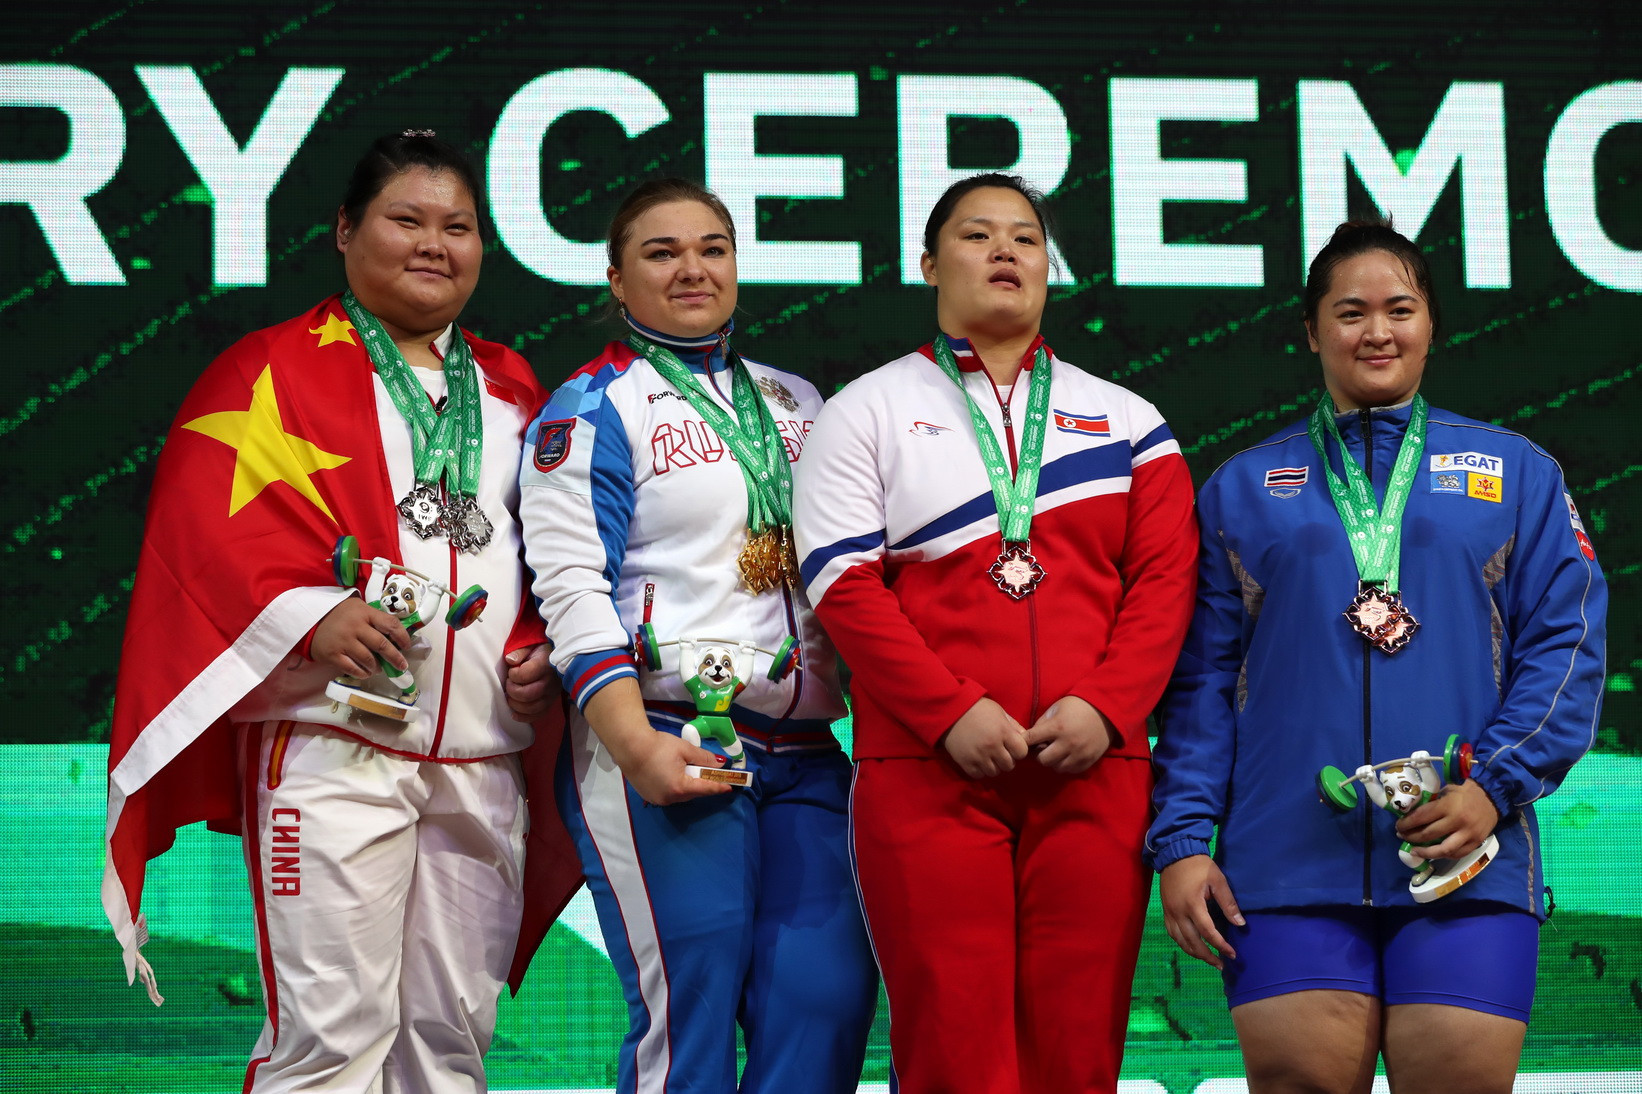 North Korea's Kim Kuk Hyang, second from left, completed the list of podium finishers having come third in the snatch ©IWF